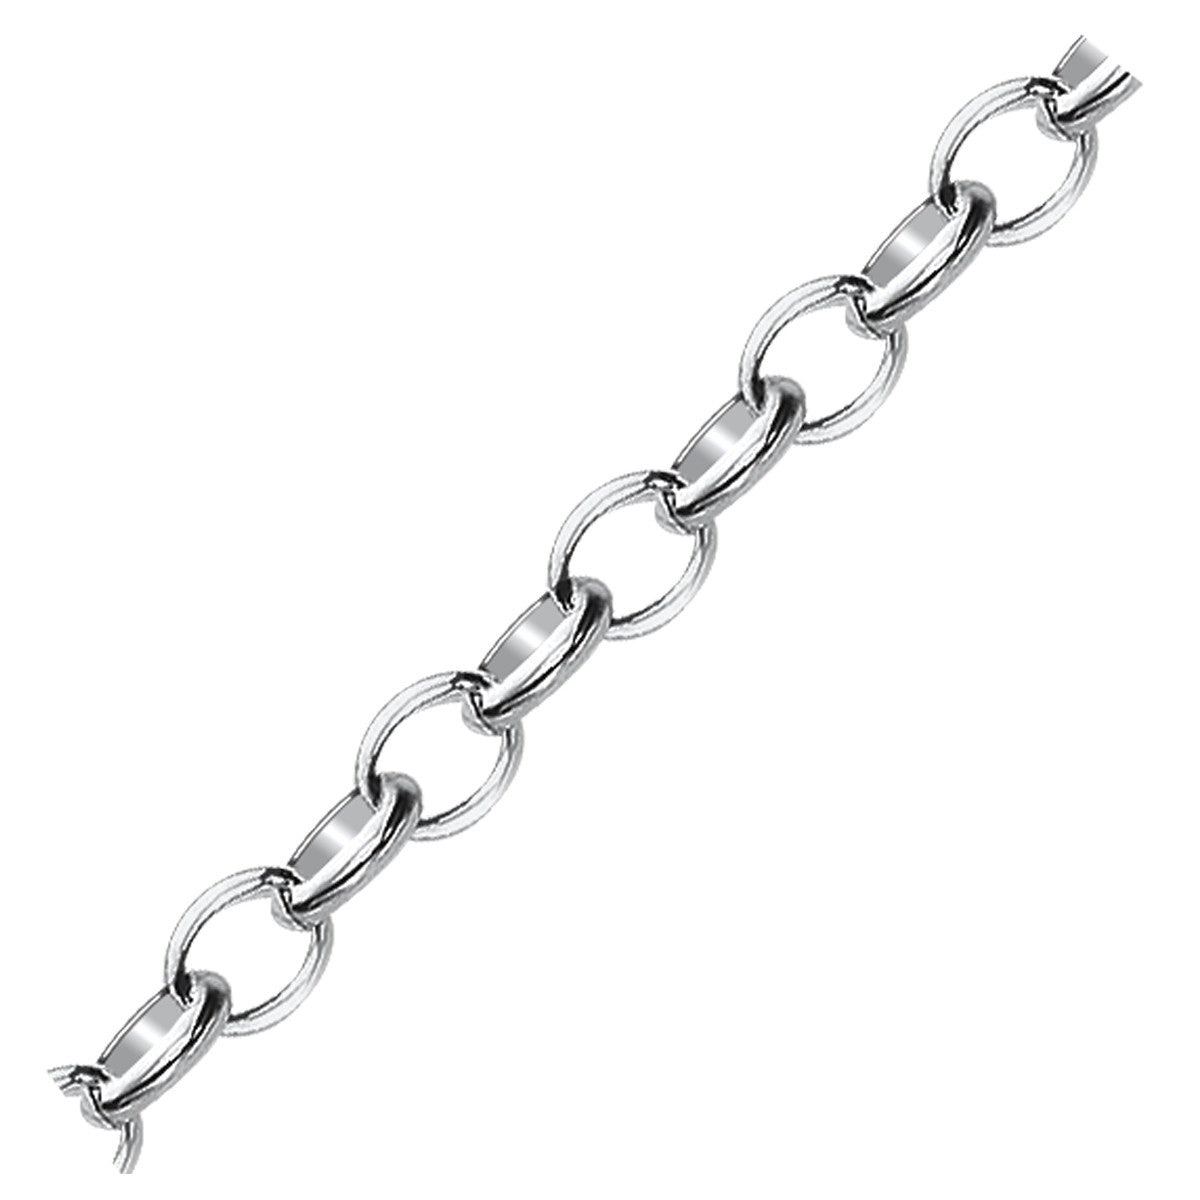 Sterling Silver Charm Polished Rhodium Plated Cable Bracelet (7.25 by 0.19 inches)